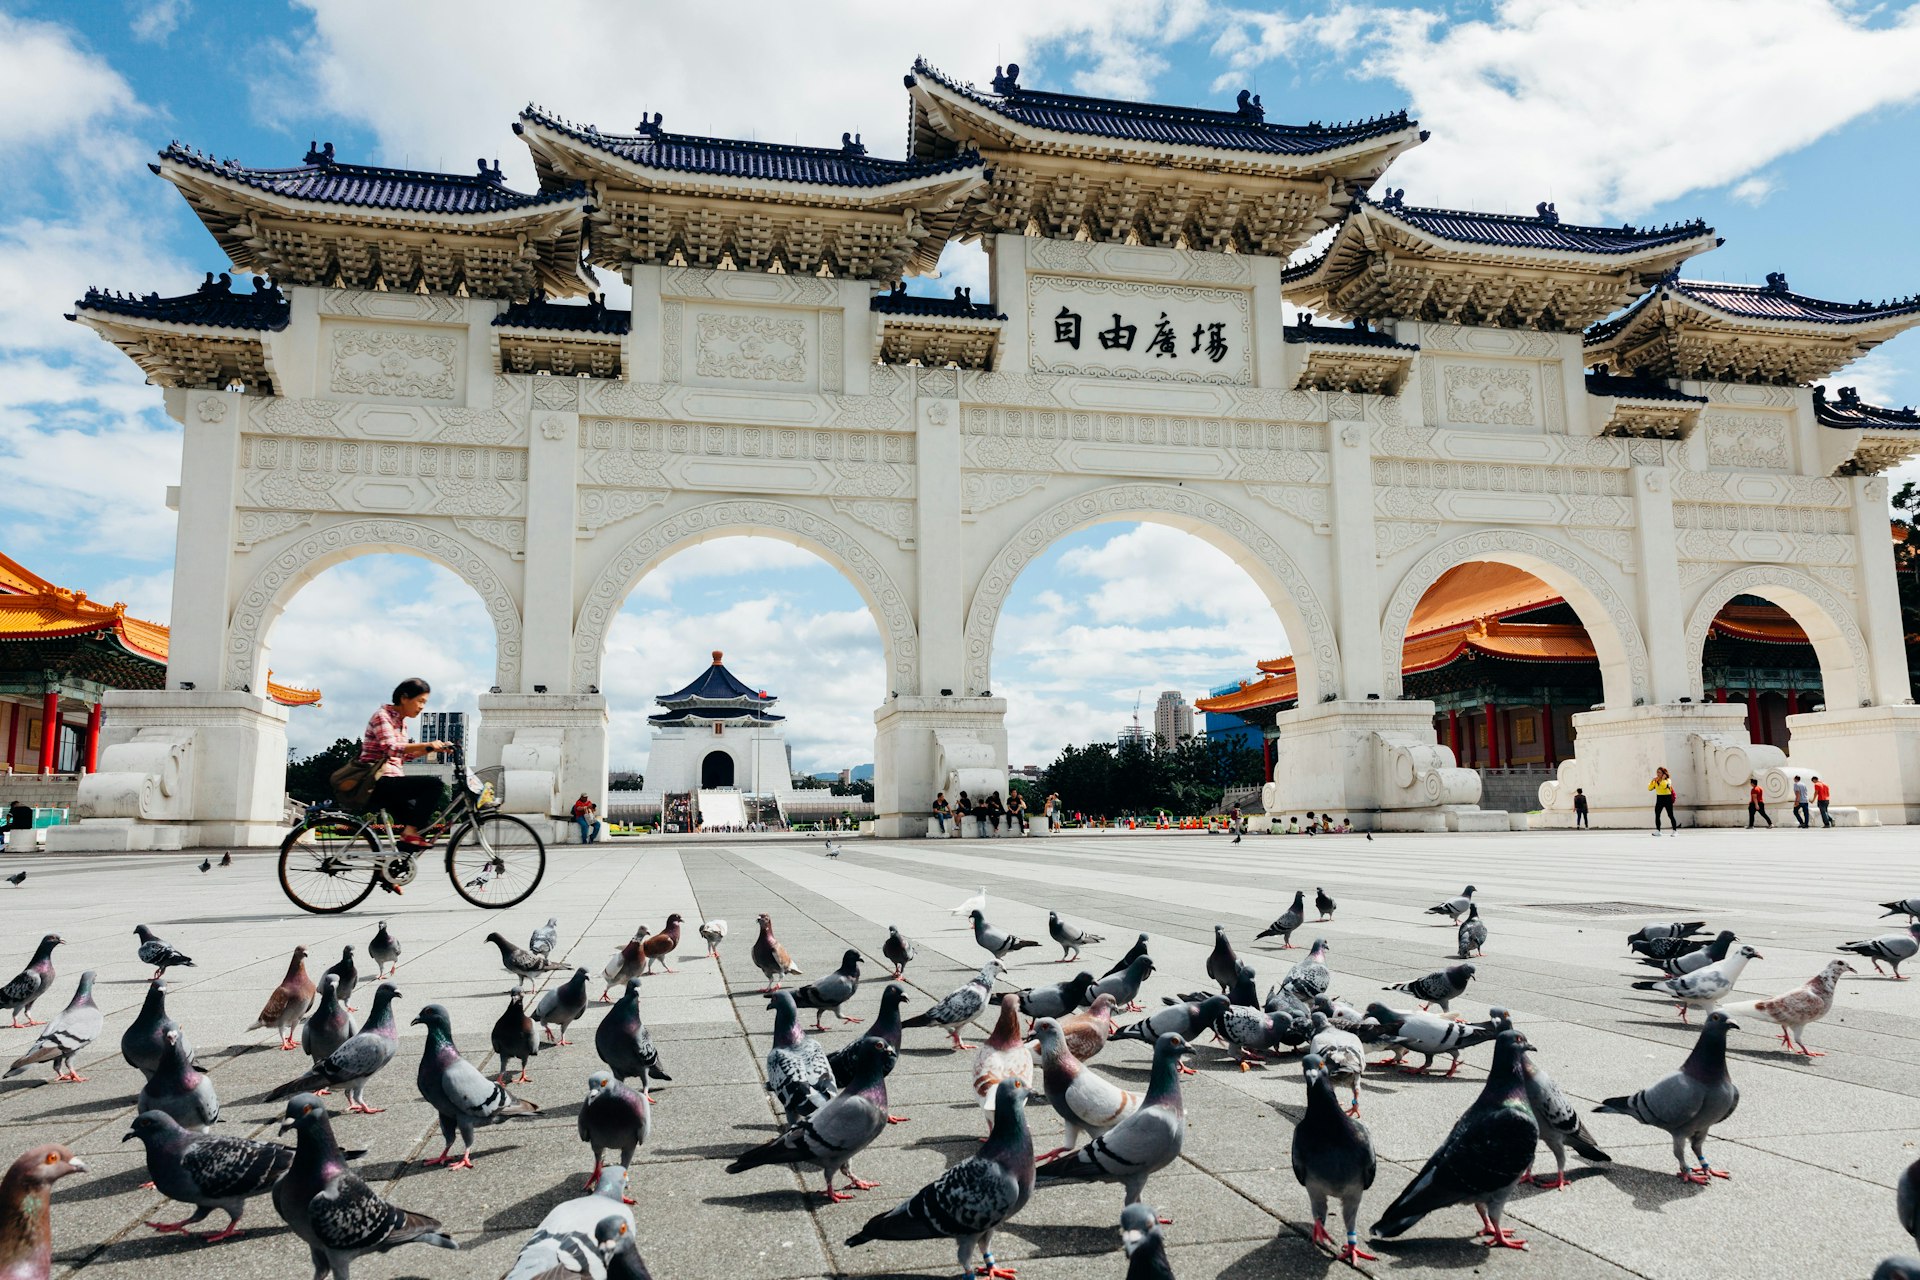 A woman cycles past the National Chiang Kai-shek Memorial Hall in Taipei on a hot sunny day with scores of pigeons walking around the square